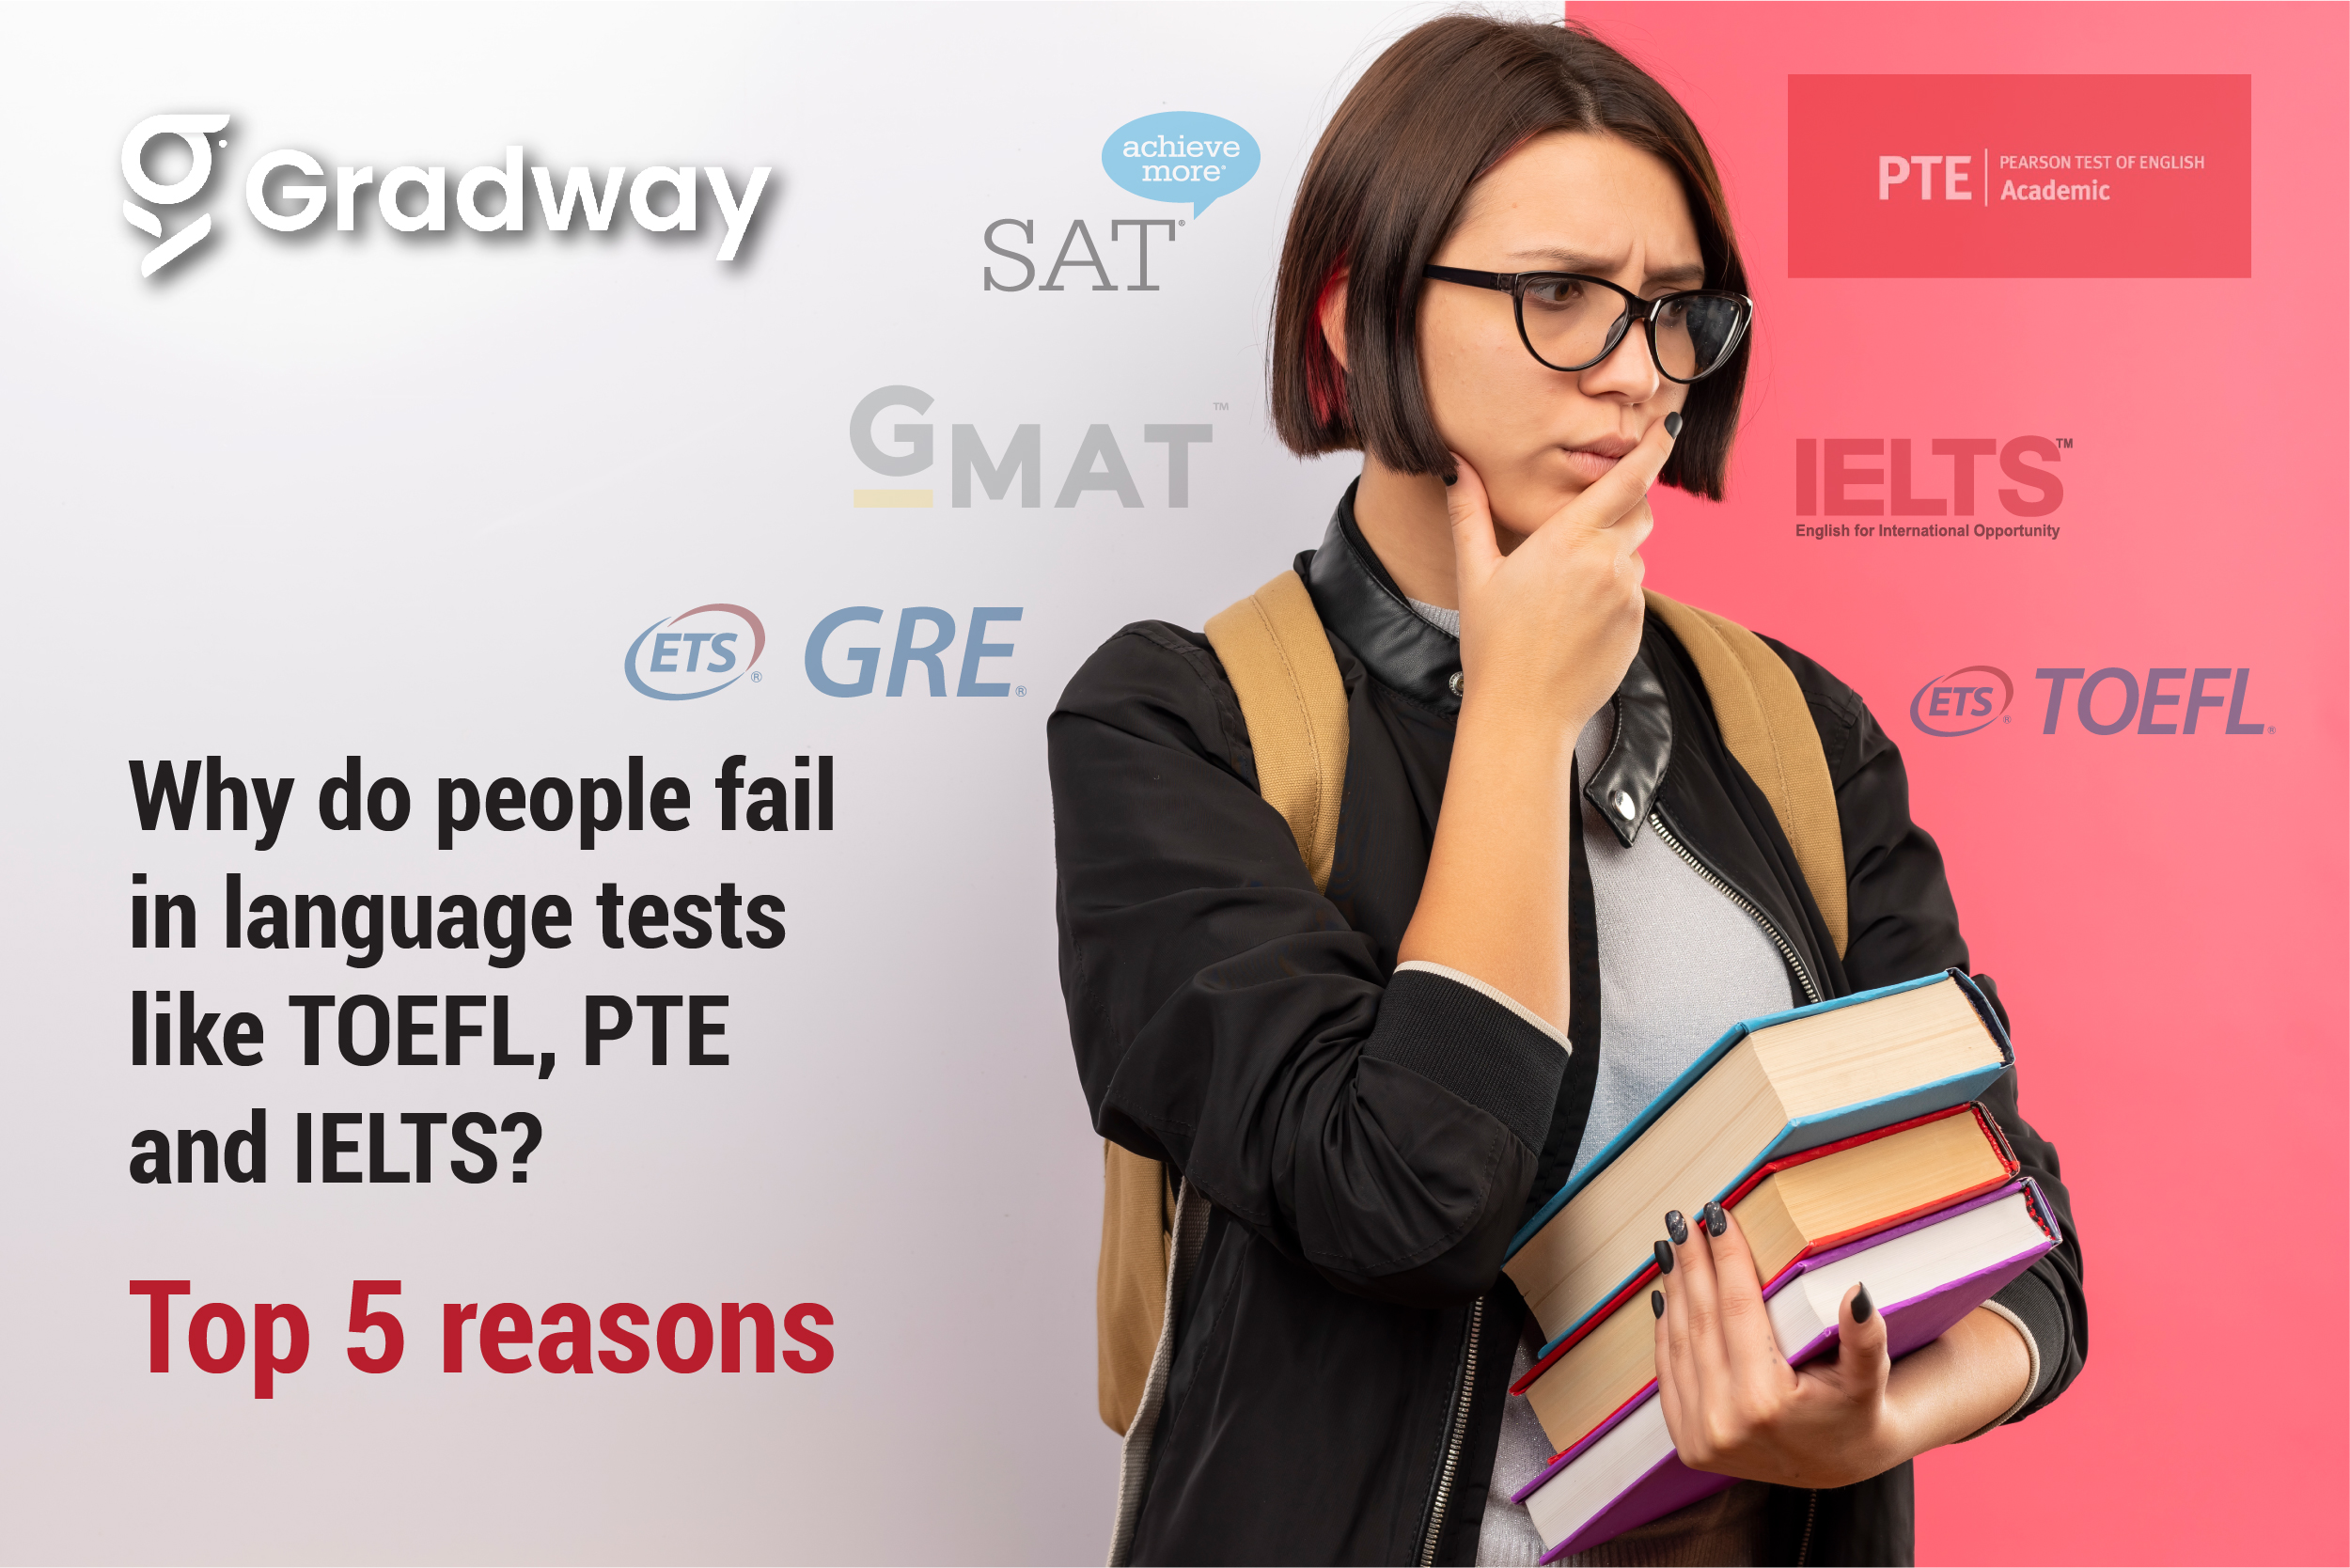 Top Reasons for failure in language tests like TOEFL, PTE, and IELTS? | Gradway